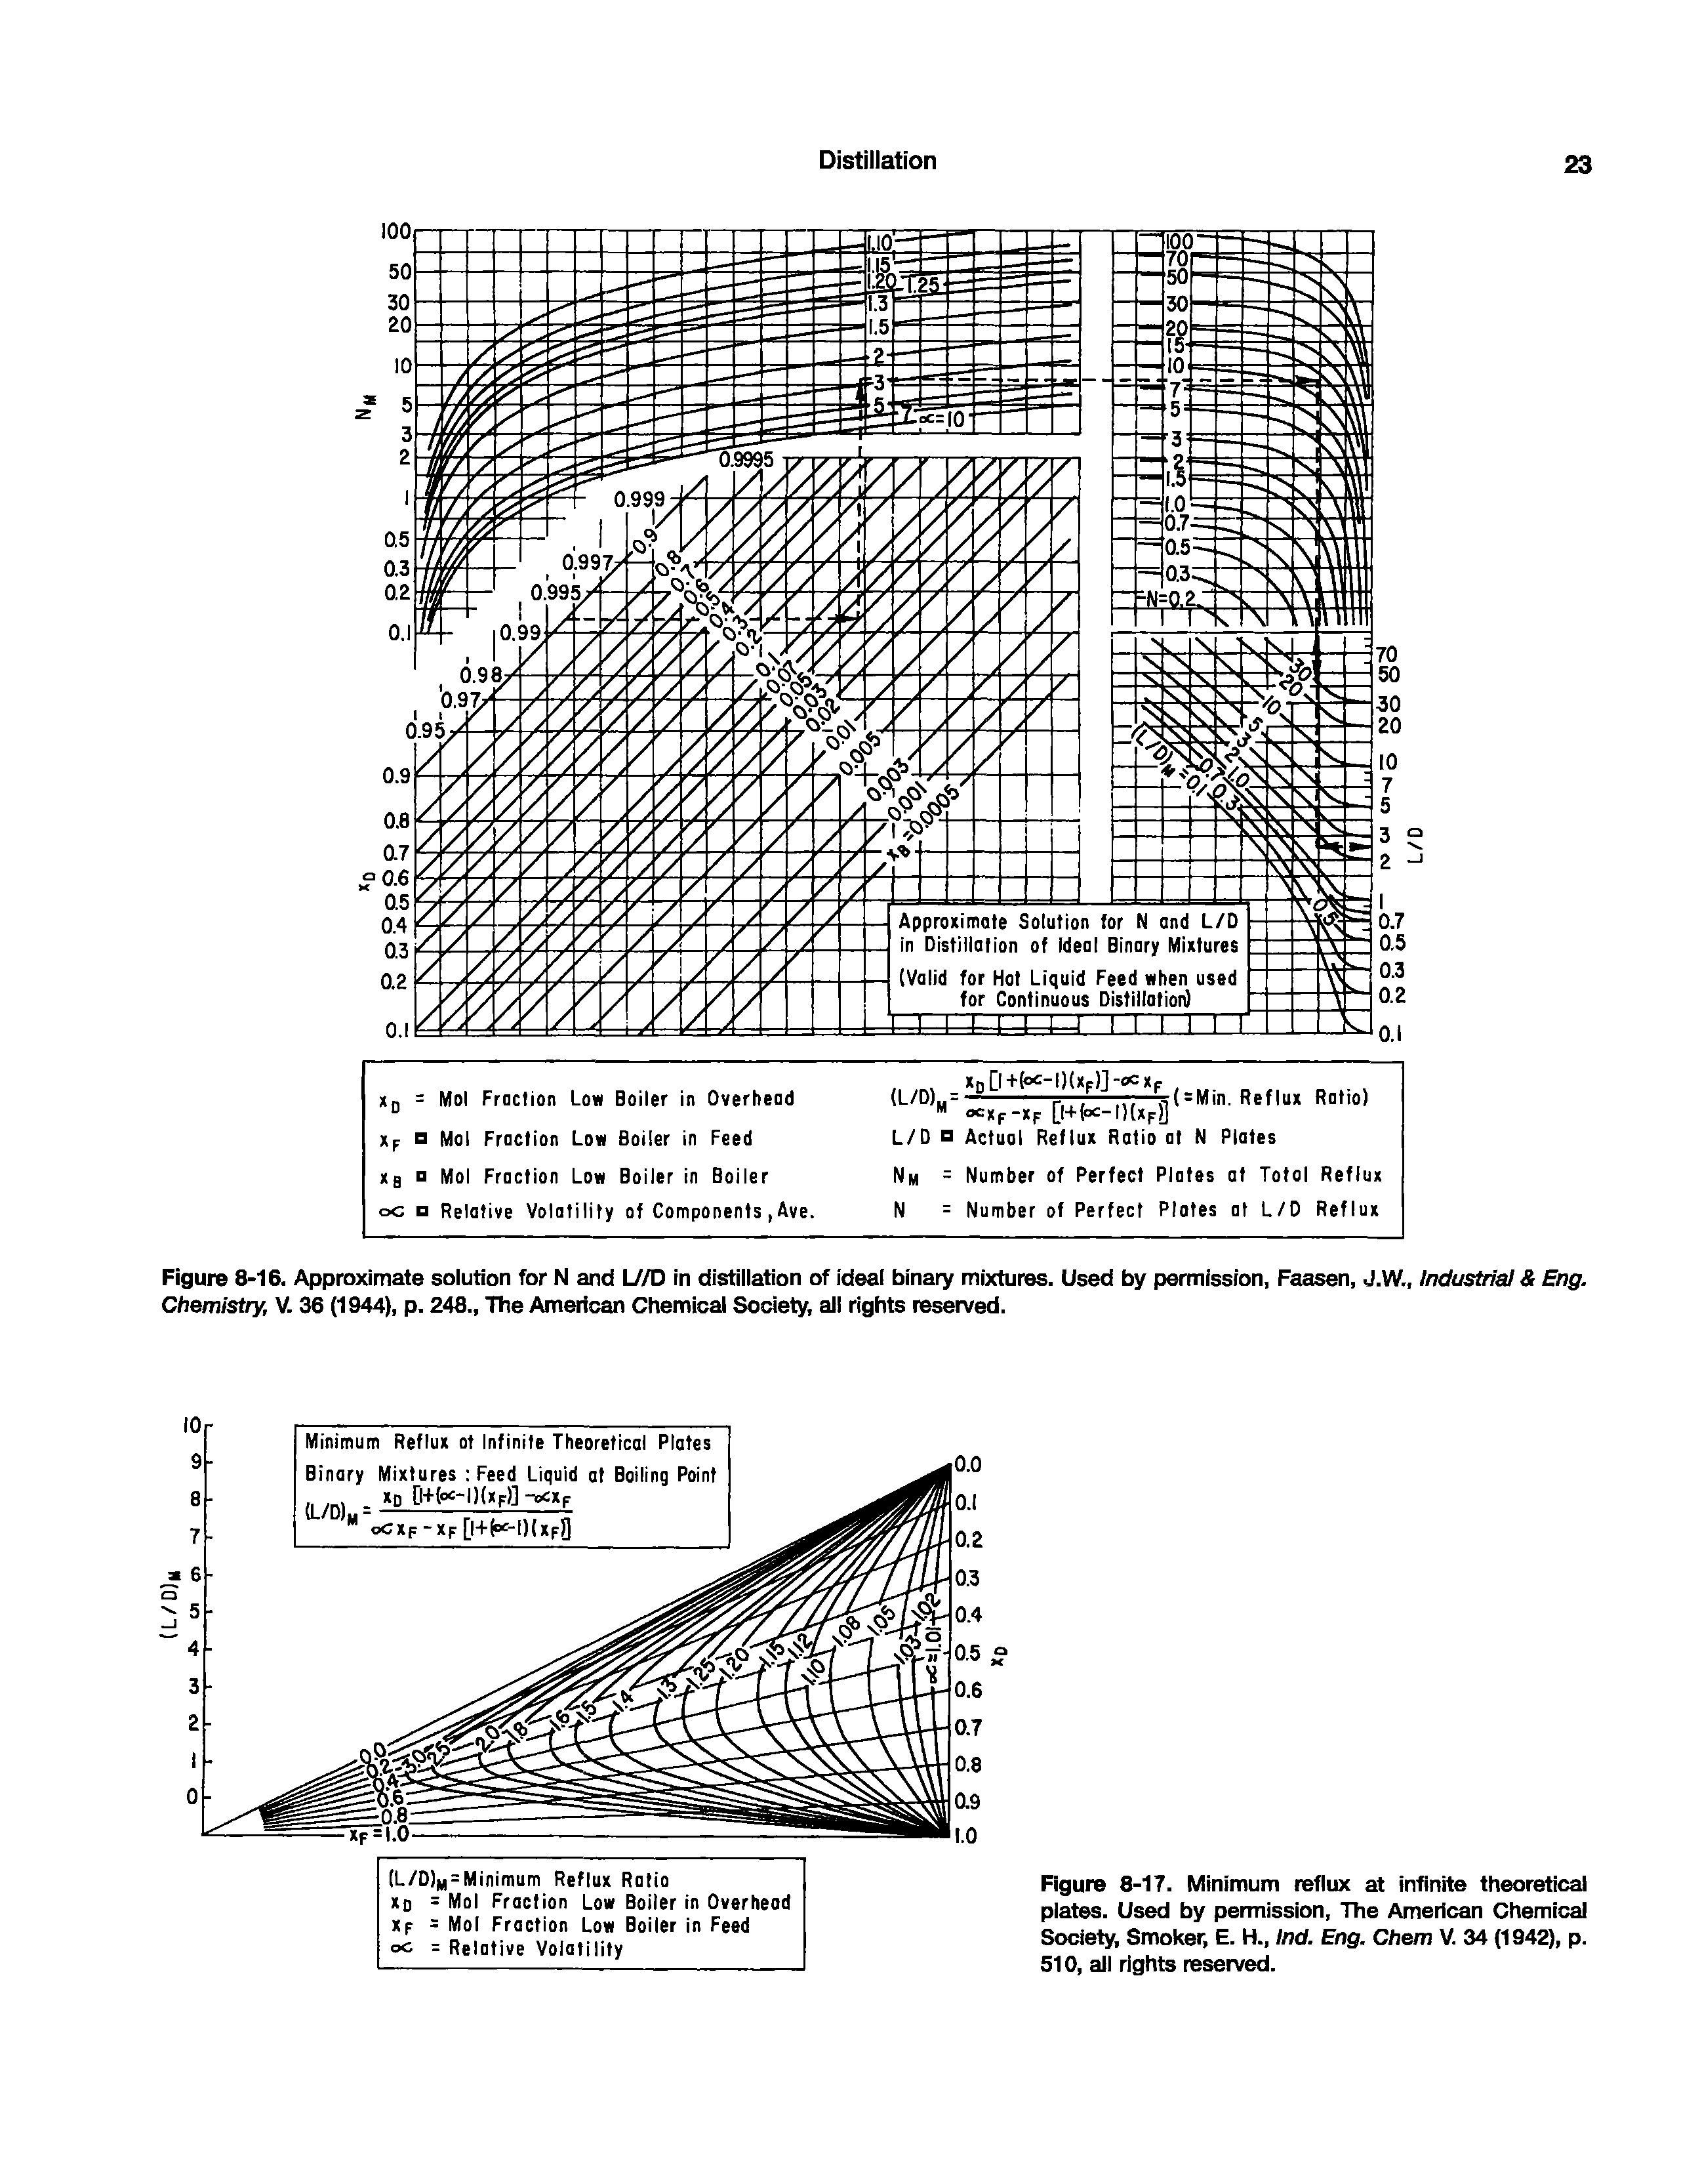 Figure 8-17. Minimum reflux at infinite theoretical plates. Used by permission. The American Chemical Society, Smoker, E. H., Ind. Eng. Chem V. 34 (1942), p. 510, all rights reserved.